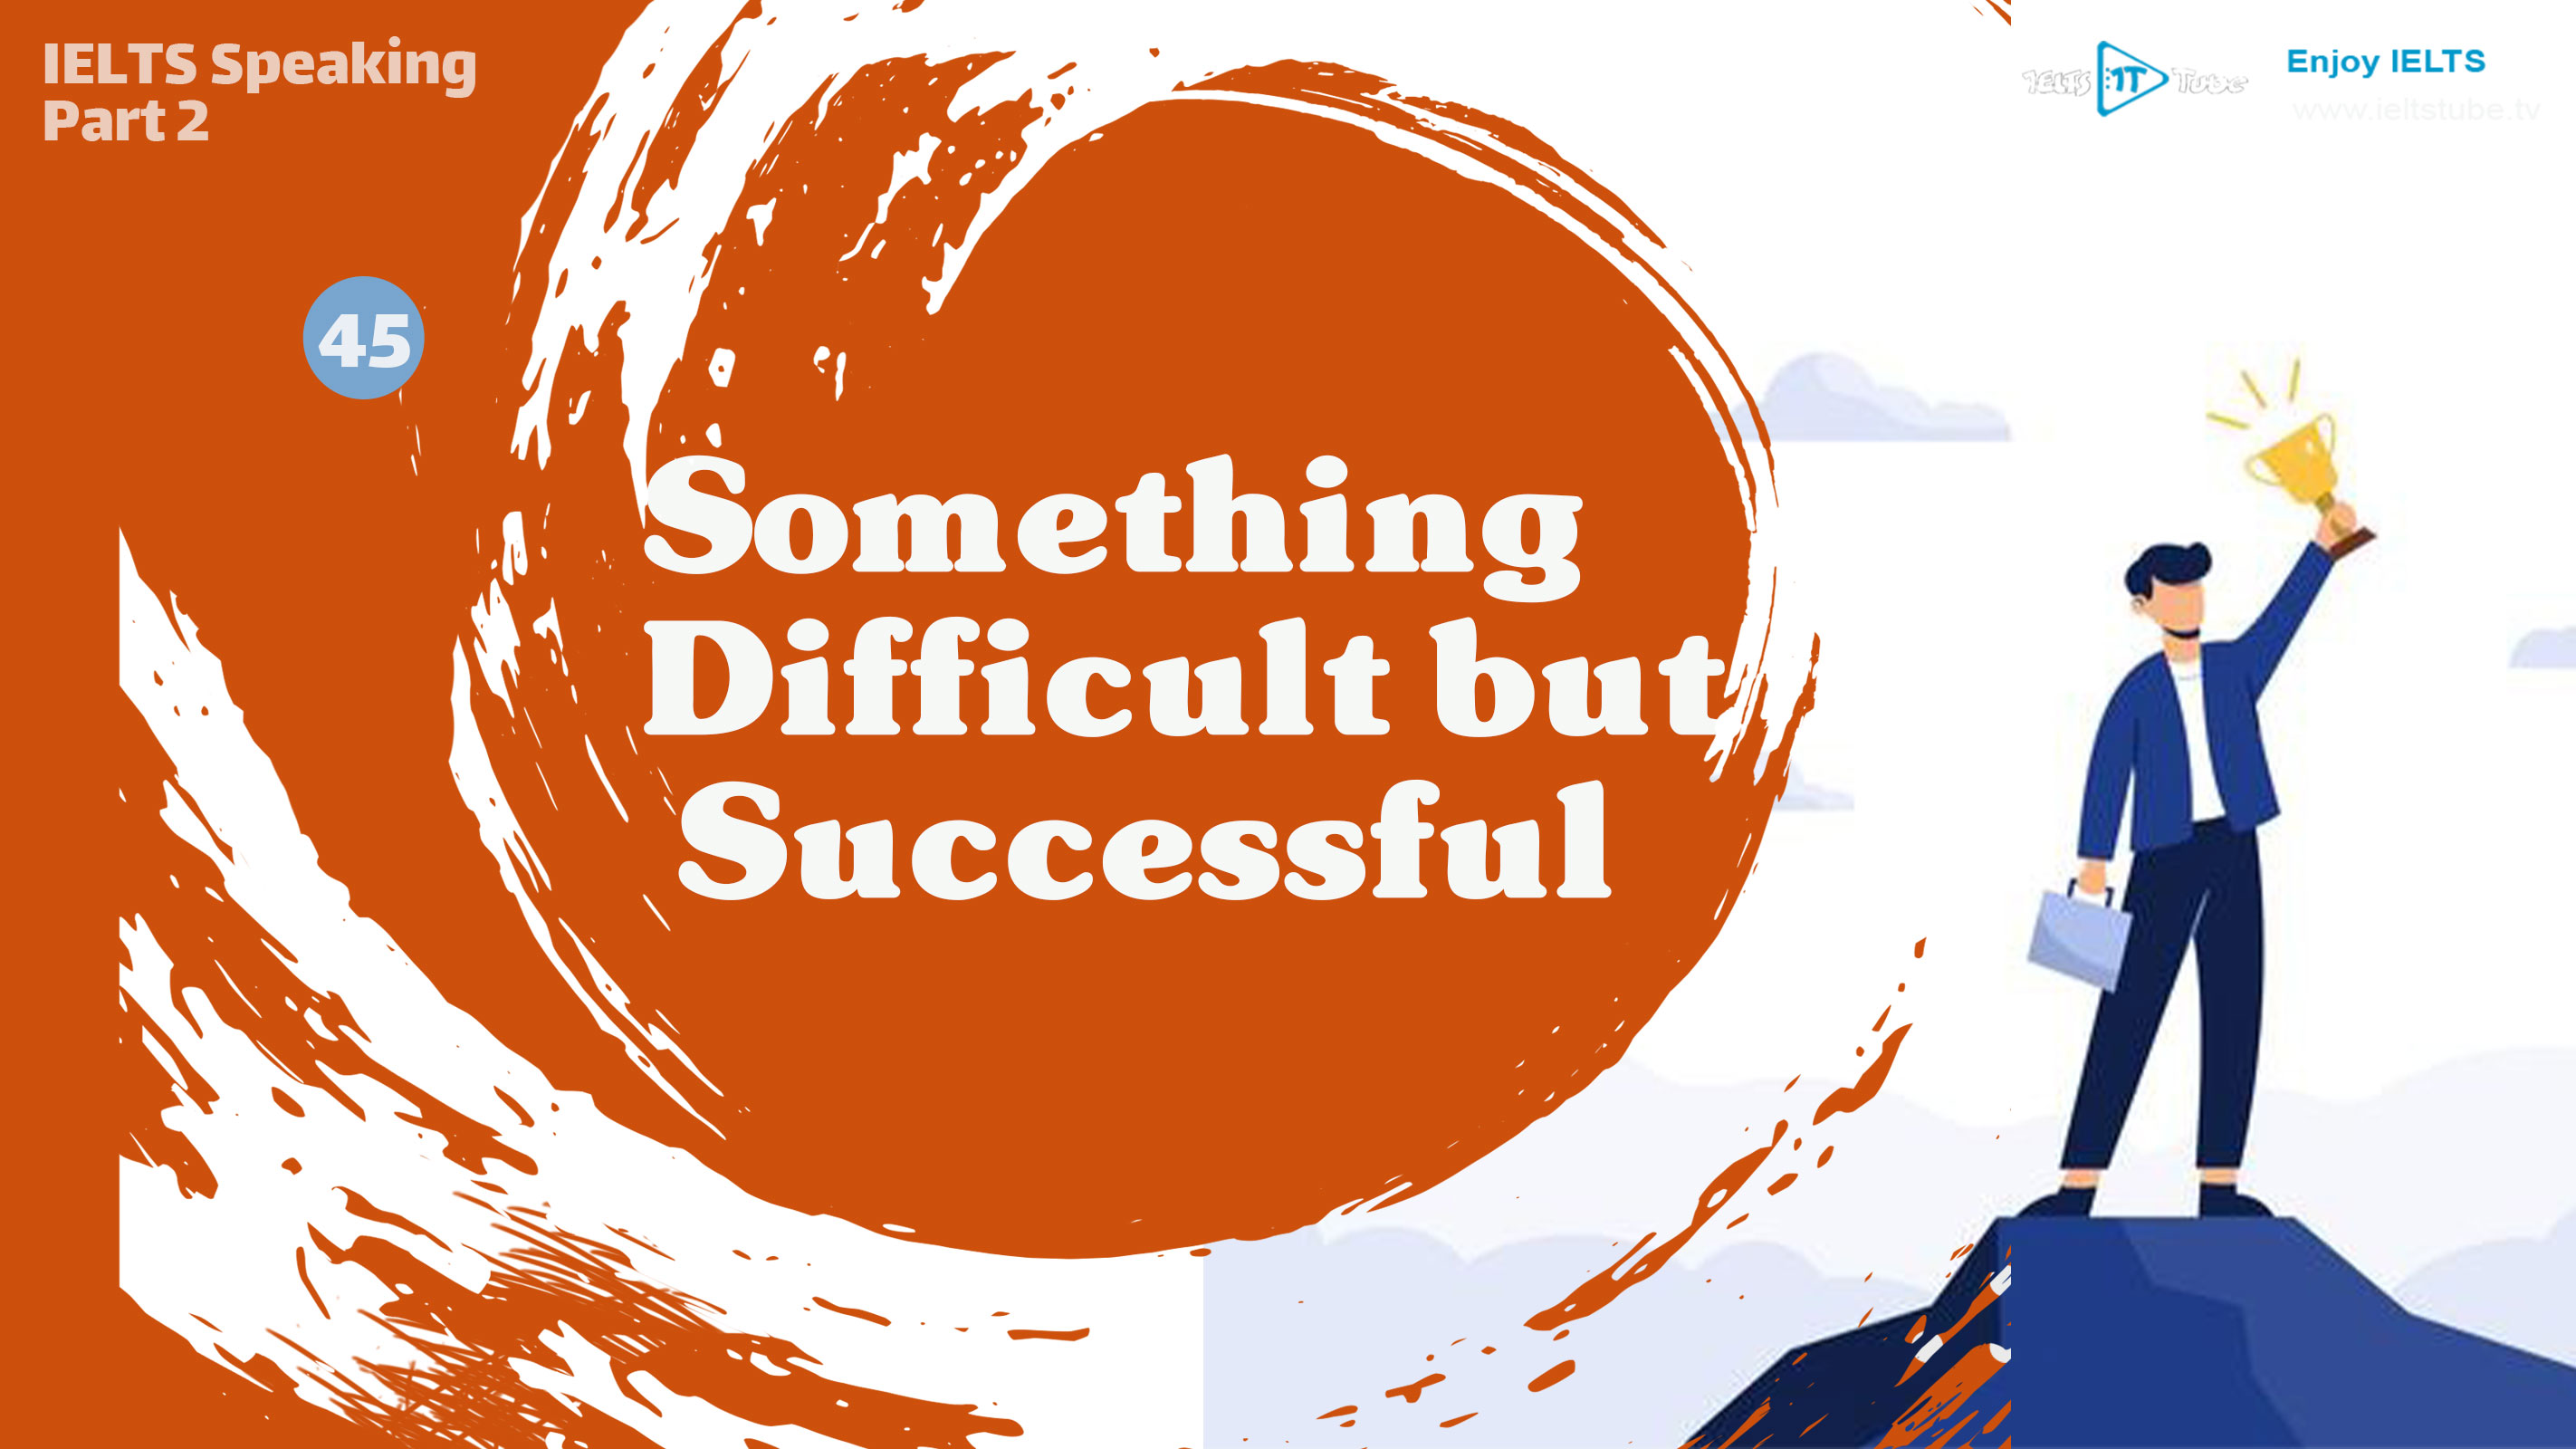 Something You Did that Was Difficult but Successful (Poster)